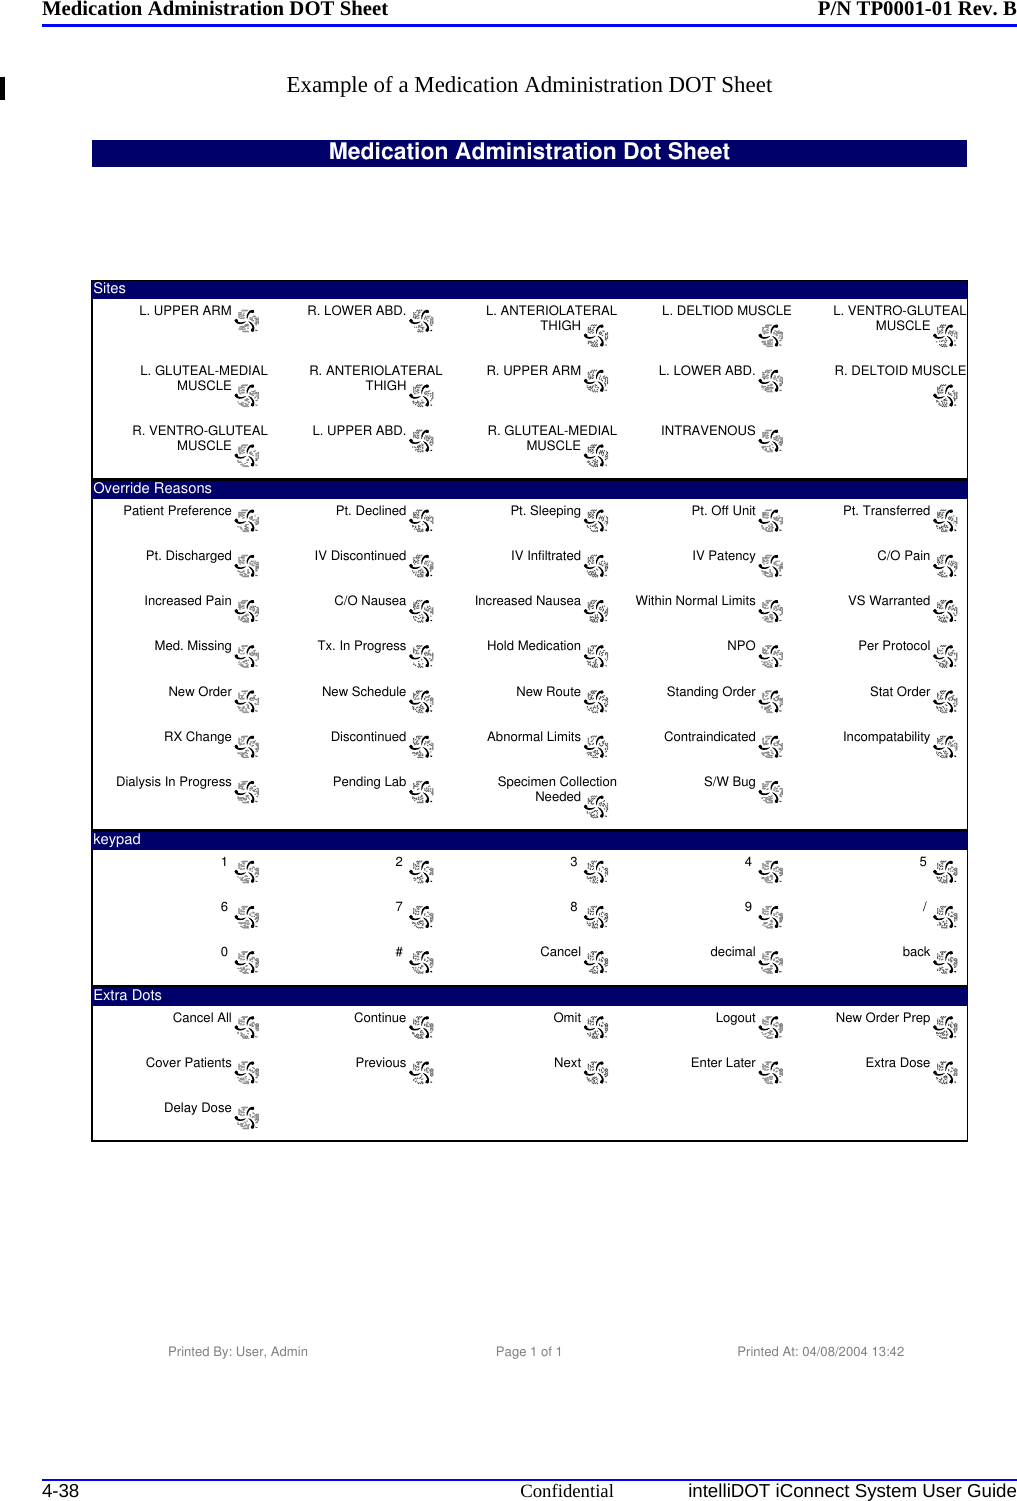 Medication Administration DOT Sheet P/N TP0001-01 Rev. B4-38 Confidential intelliDOT iConnect System User GuideExample of a Medication Administration DOT SheetSitesL. UPPER ARM R. LOWER ABD. L. ANTERIOLATERALTHIGH L. DELTIOD MUSCLE L. VENTRO-GLUTEALMUSCLEL. GLUTEAL-MEDIALMUSCLE R. ANTERIOLATERALTHIGH R. UPPER ARM L. LOWER ABD. R. DELTOID MUSCLER. VENTRO-GLUTEALMUSCLE L. UPPER ABD. R. GLUTEAL-MEDIALMUSCLE INTRAVENOUSOverride ReasonsPatient Preference Pt. Declined Pt. Sleeping Pt. Off Unit Pt. TransferredPt. Discharged IV Discontinued IV Infiltrated IV Patency C/O PainIncreased Pain C/O Nausea Increased Nausea Within Normal Limits VS WarrantedMed. Missing Tx. In Progress Hold Medication NPO Per ProtocolNew Order New Schedule New Route Standing Order Stat OrderRX Change Discontinued Abnormal Limits Contraindicated IncompatabilityDialysis In Progress Pending Lab Specimen CollectionNeeded S/W Bugkeypad1 2 3 4 56 7 8 9 /0 # Cancel decimal backExtra DotsCancel All Continue Omit Logout New Order PrepCover Patients Previous Next Enter Later Extra DoseDelay DoseMedication Administration Dot SheetPrinted By: User, Admin Page 1 of 1 Printed At: 04/08/2004 13:42